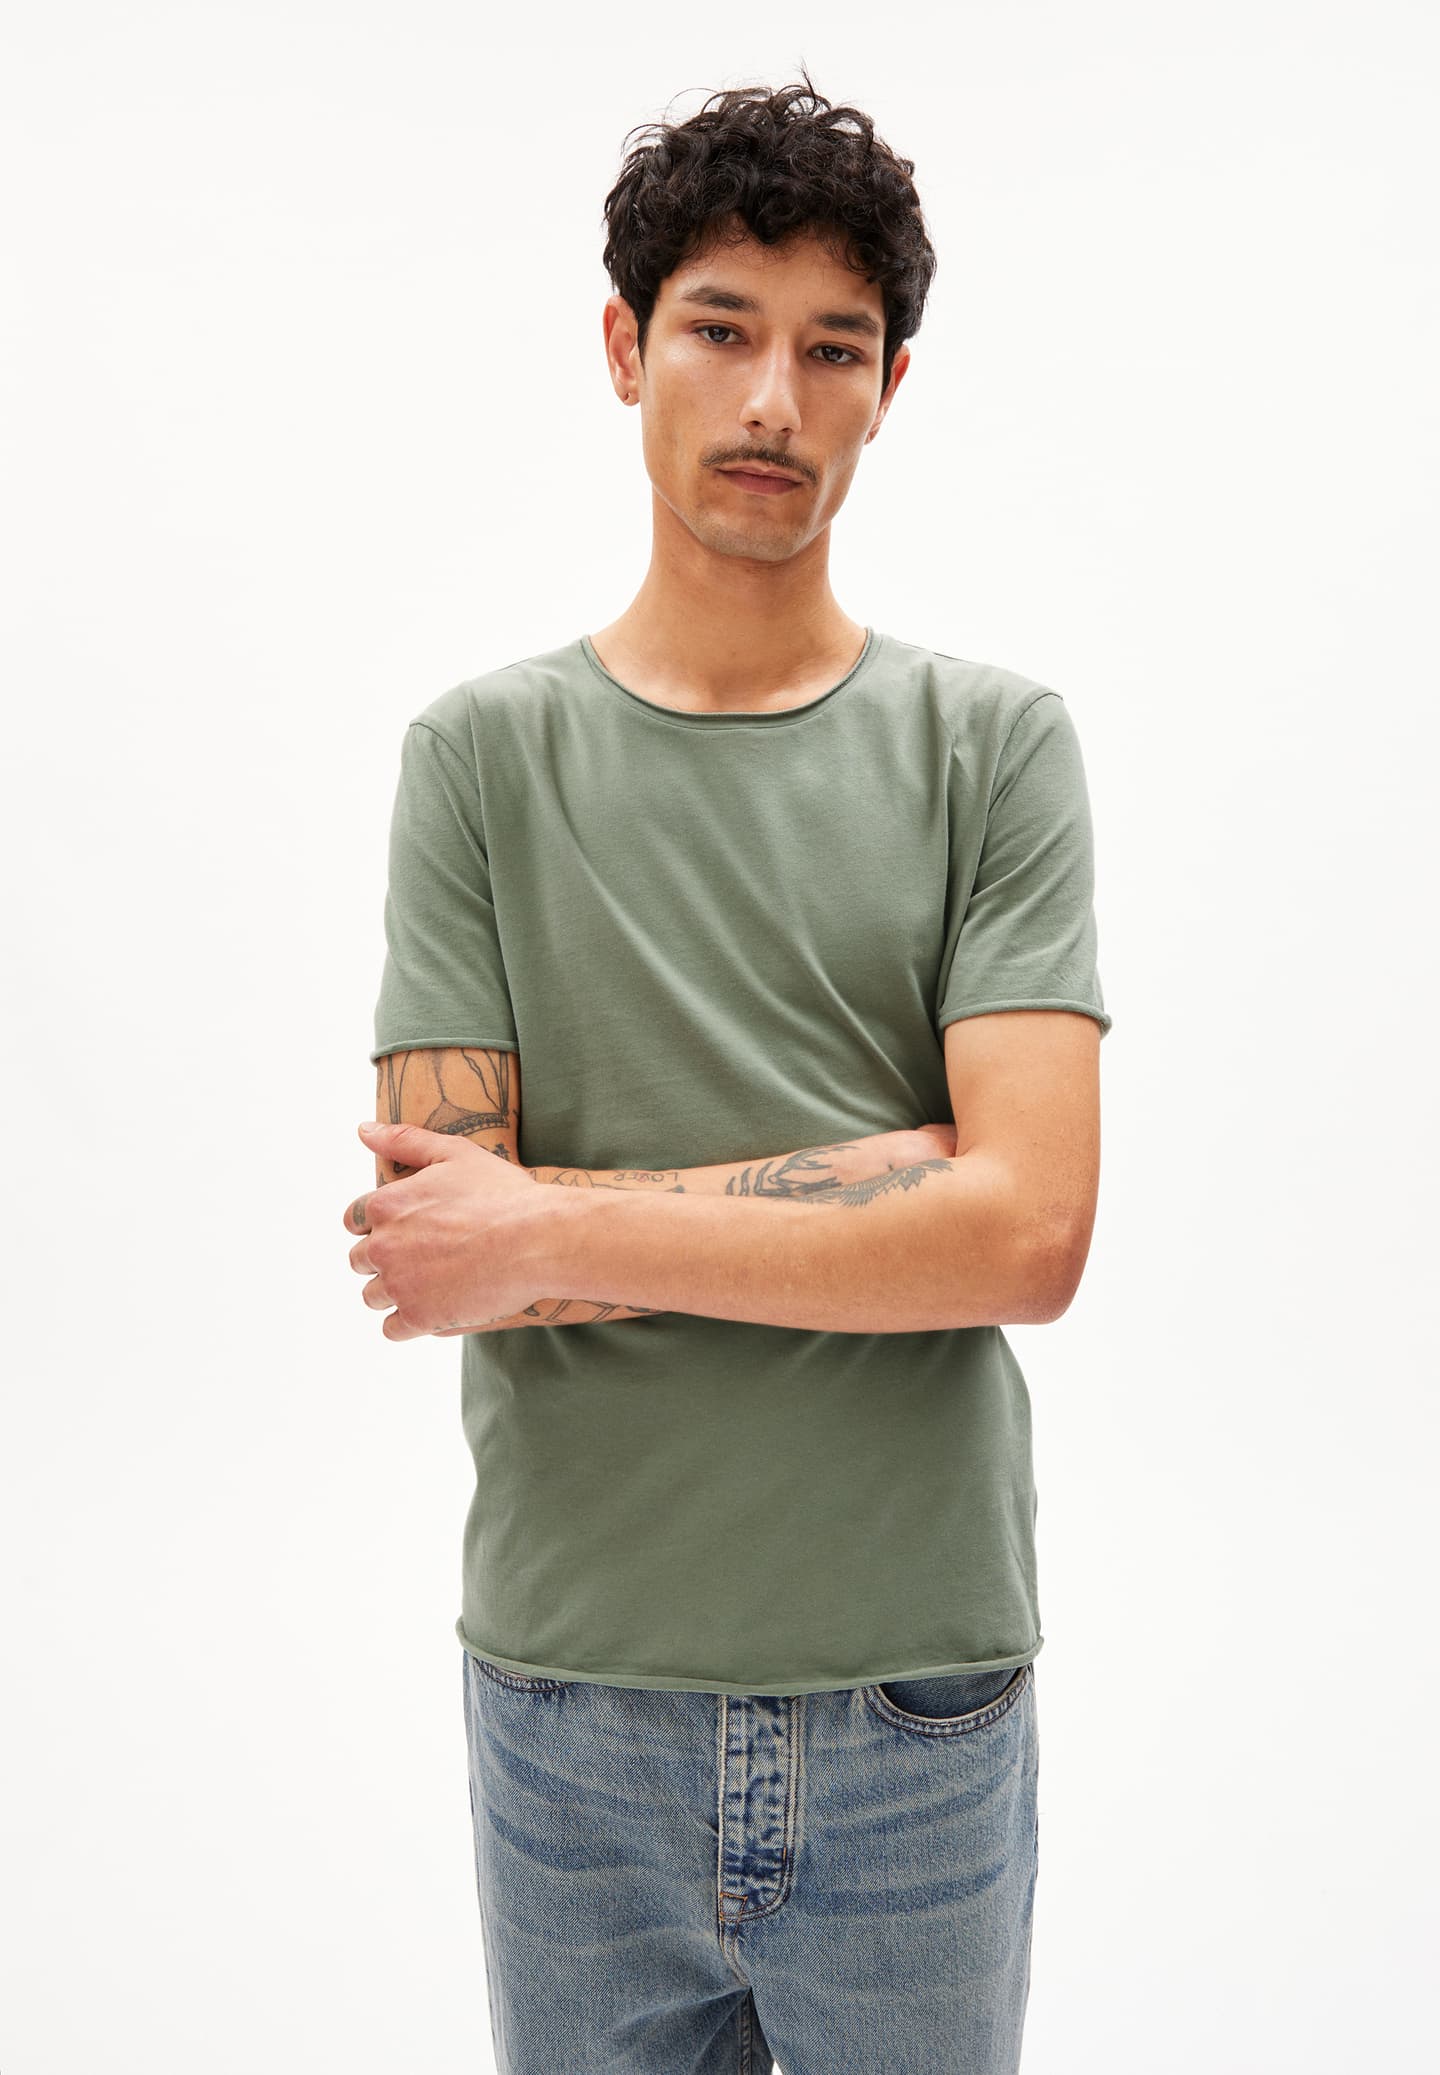 t-shirt aamon brushed grey green